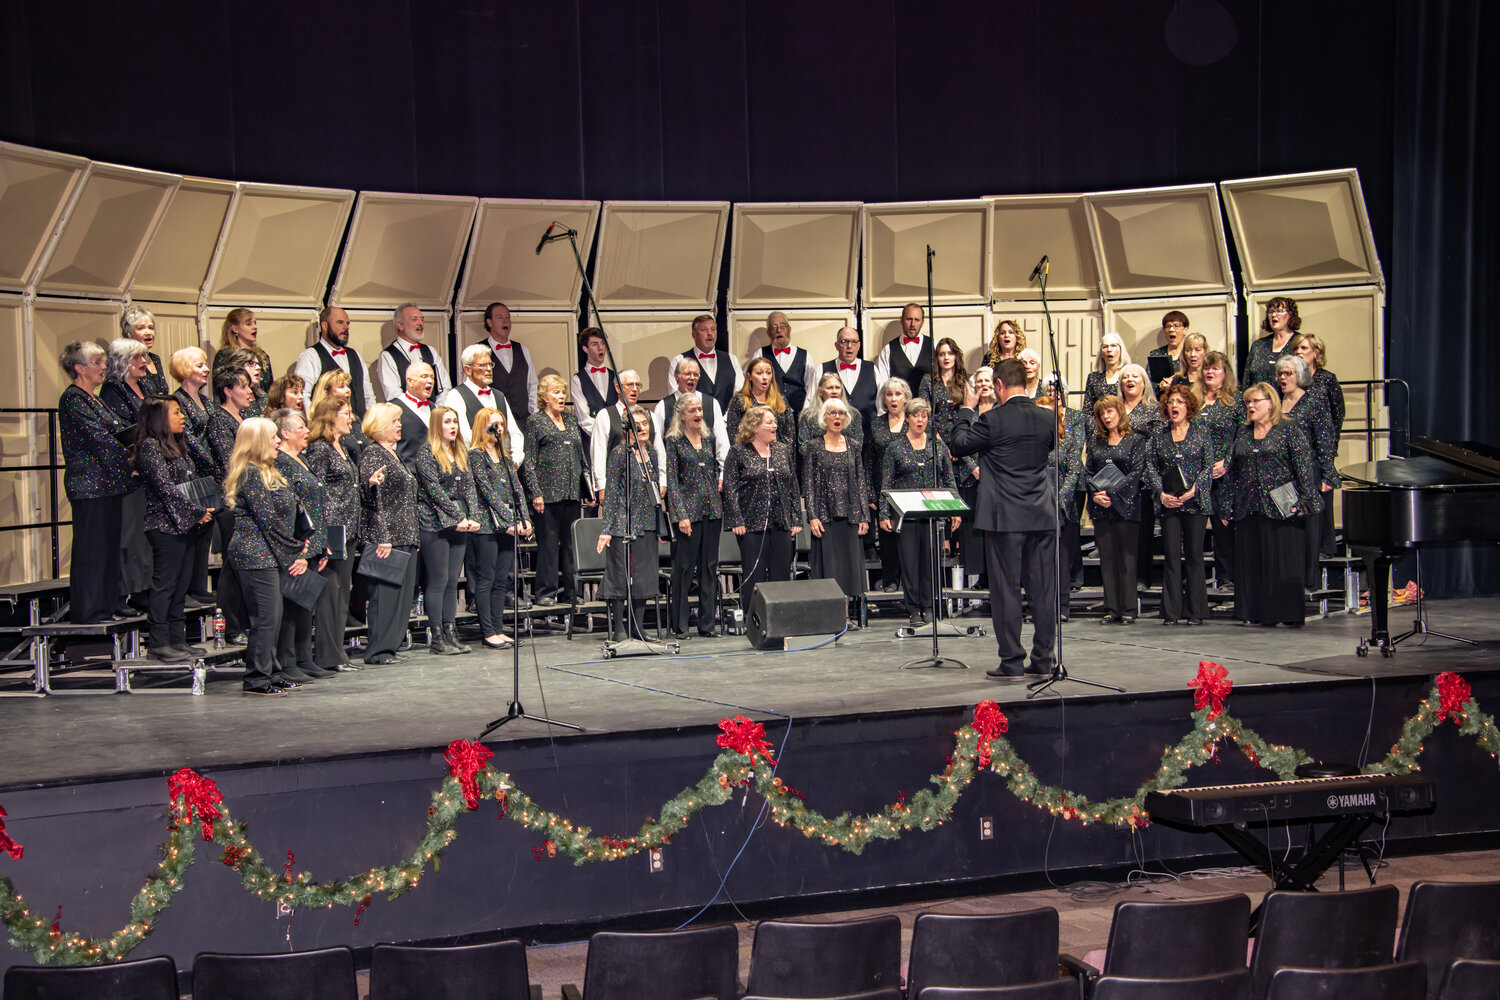 The Pagosa Springs Community Choir’s Concerts are set to offer beautiful choral music in celebration of Christmas on Dec. 8 and 9 at 7 p.m., and Sunday at 4 p.m. in the Pagosa Springs High School auditorium.